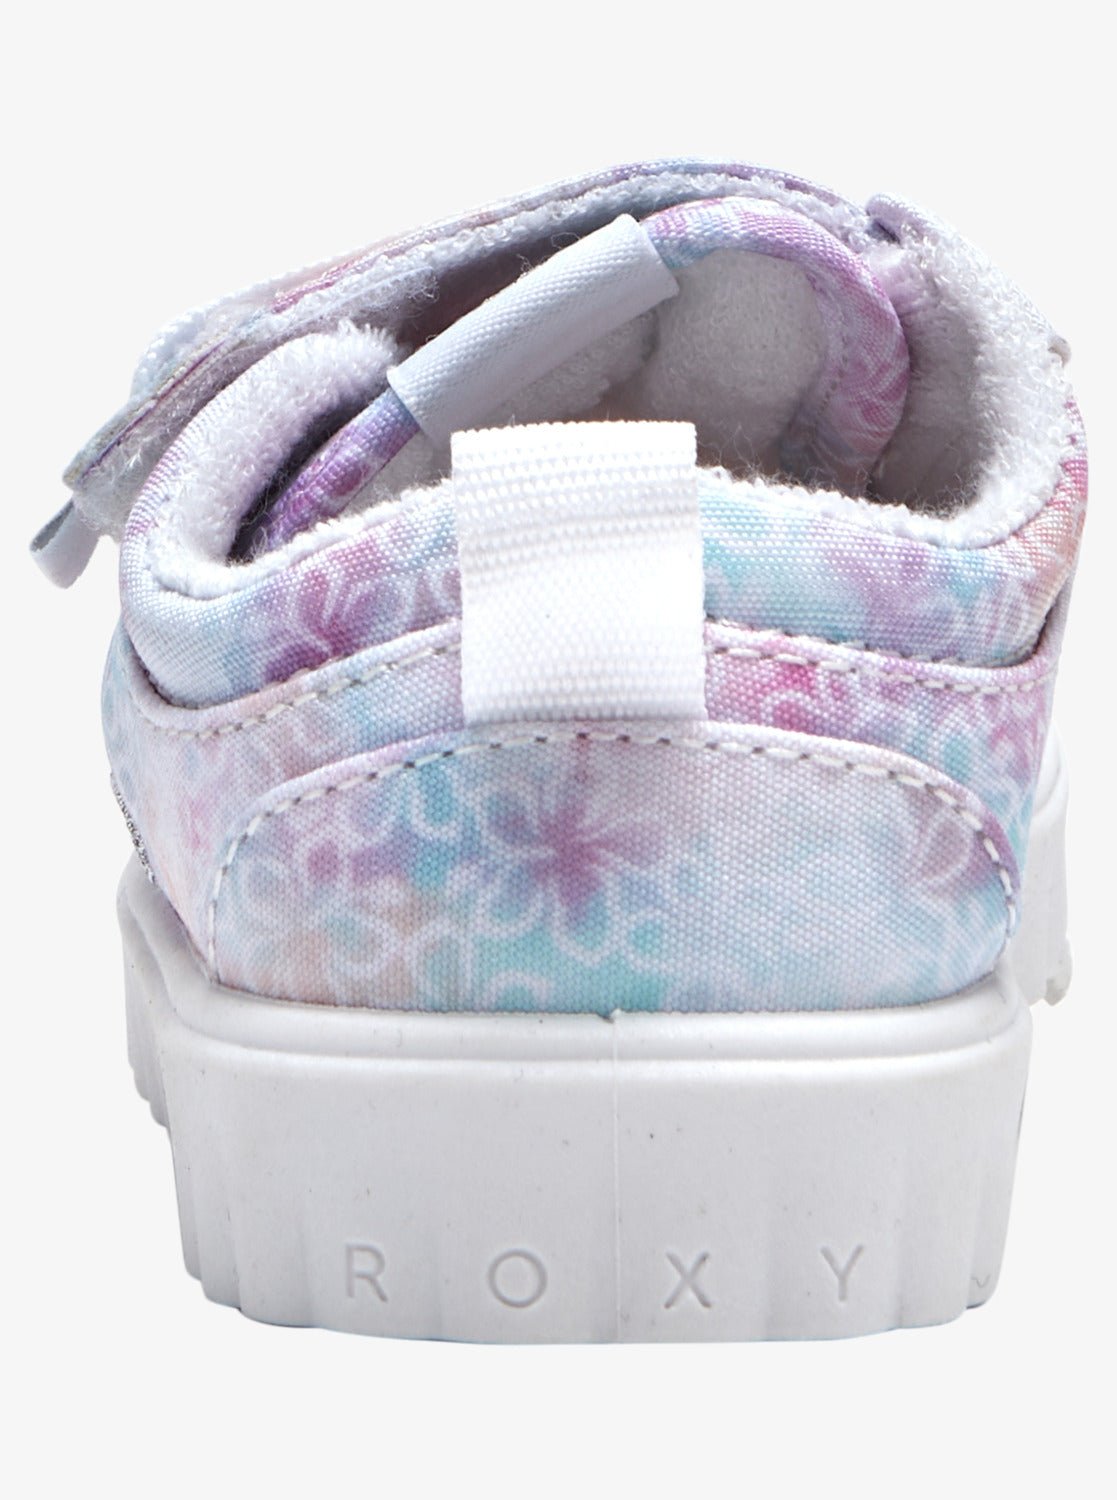 Roxy Toddler's Sheilahh Shoes - Mountain Kids Outfitters